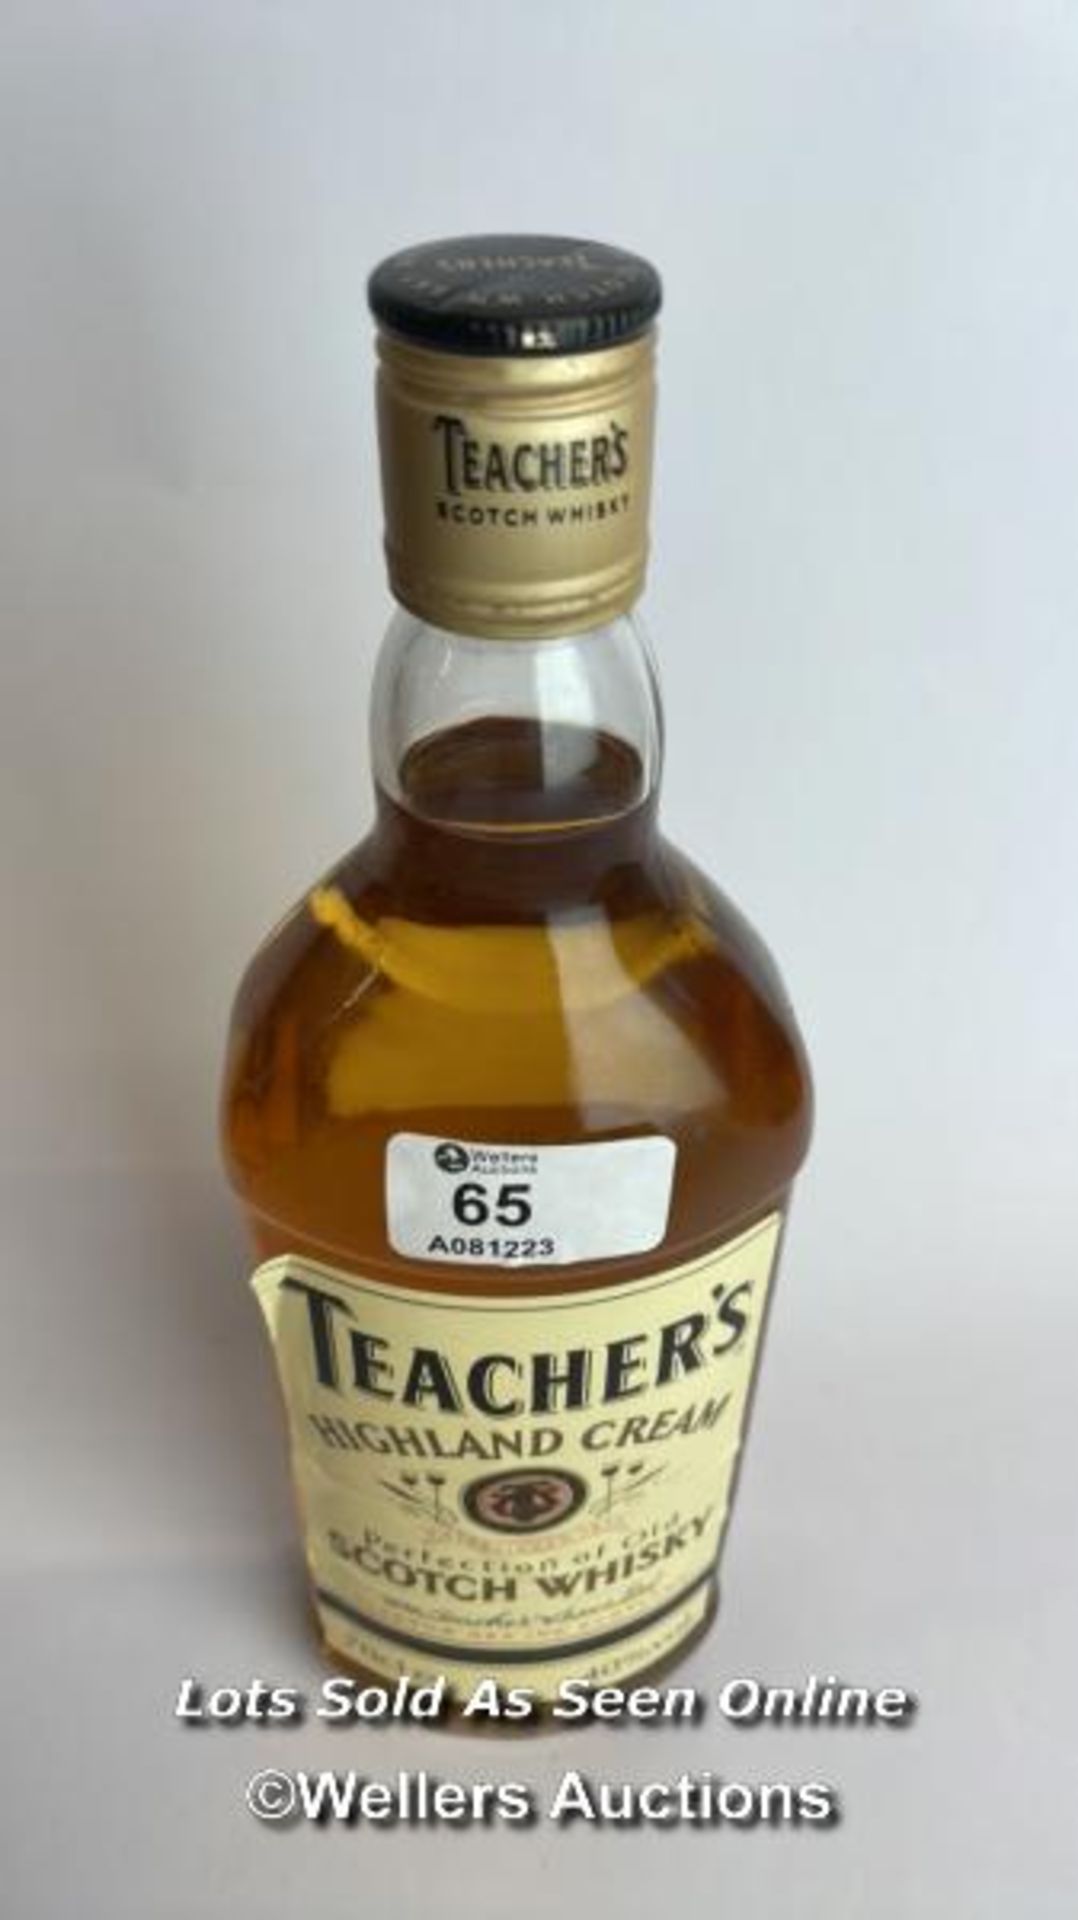 Teachers Highland Cream Scotch Whisky, 70cl, 43% vol / Please see images for fill level and - Image 3 of 4